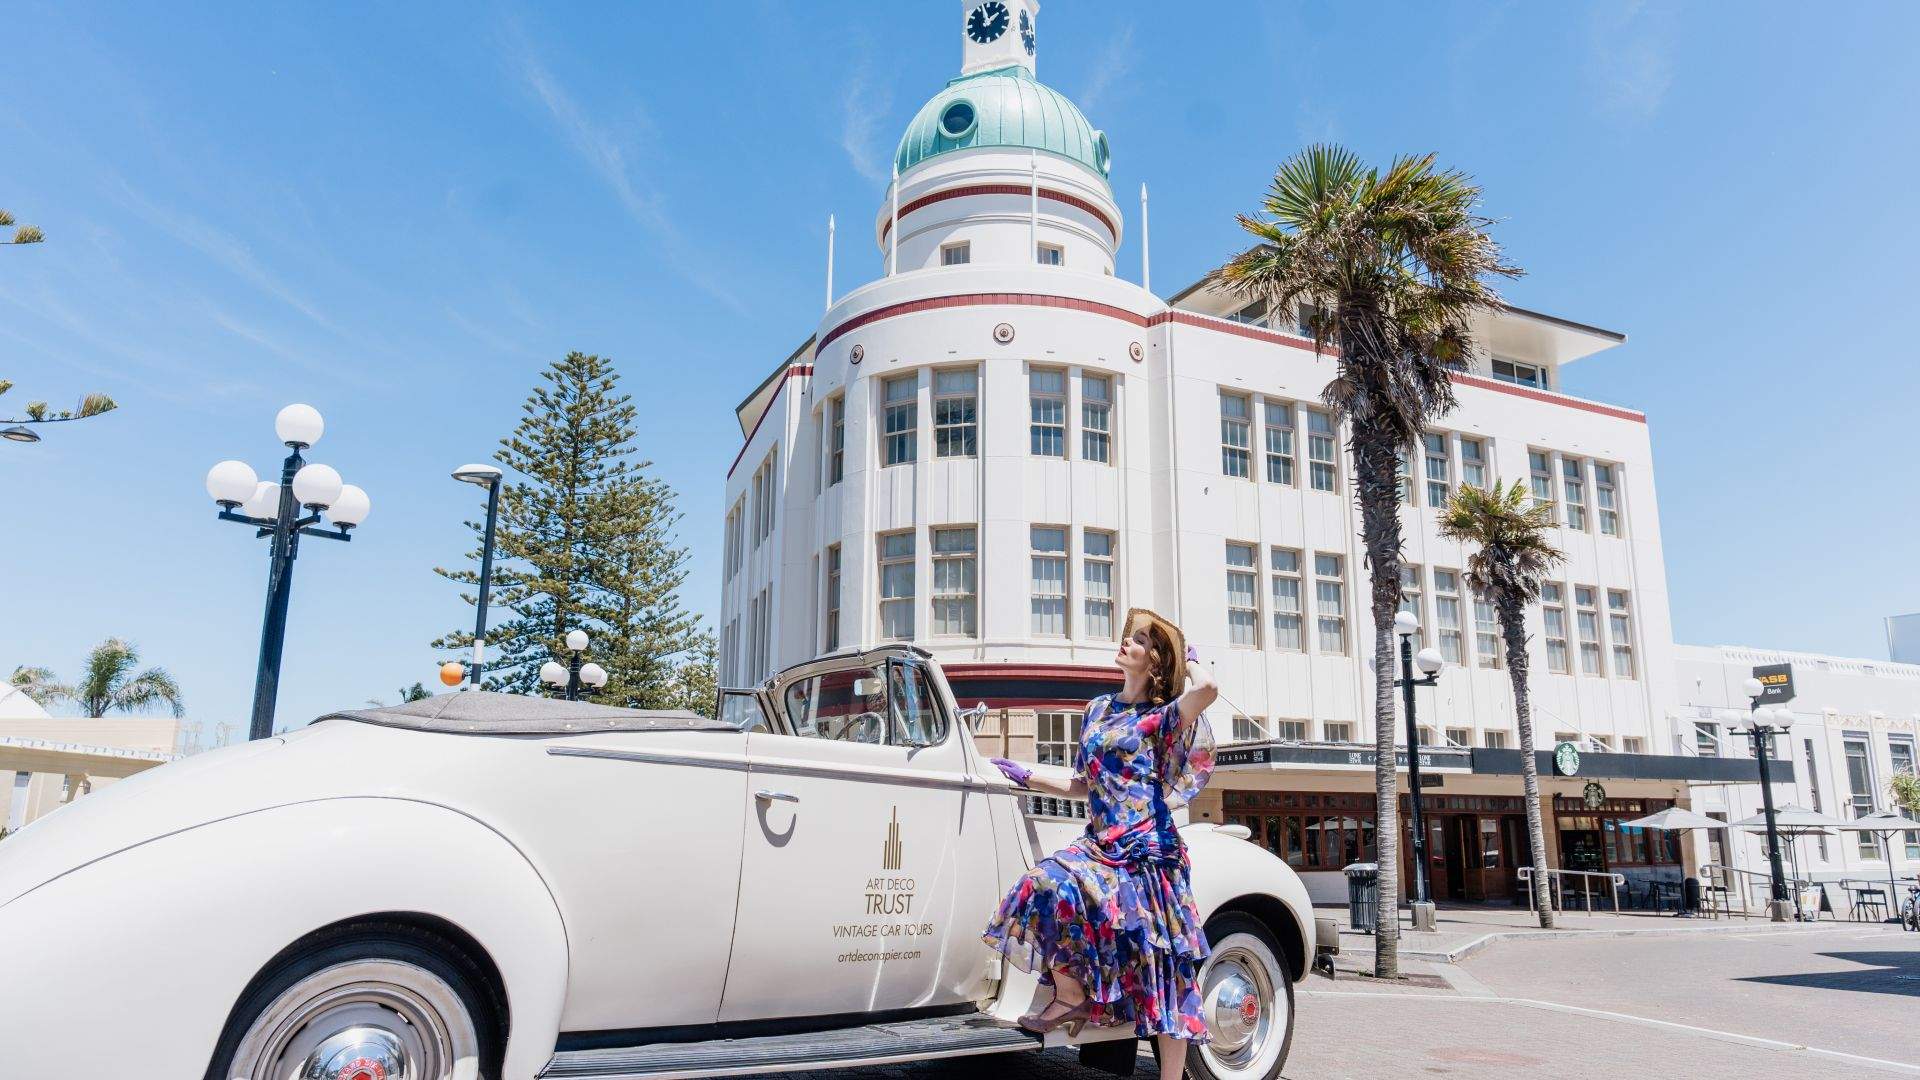 New Zealand's Biggest Dress-Up Party, Napier's Art Deco Festival, Is Bringing 1920s Glamour to the Bay